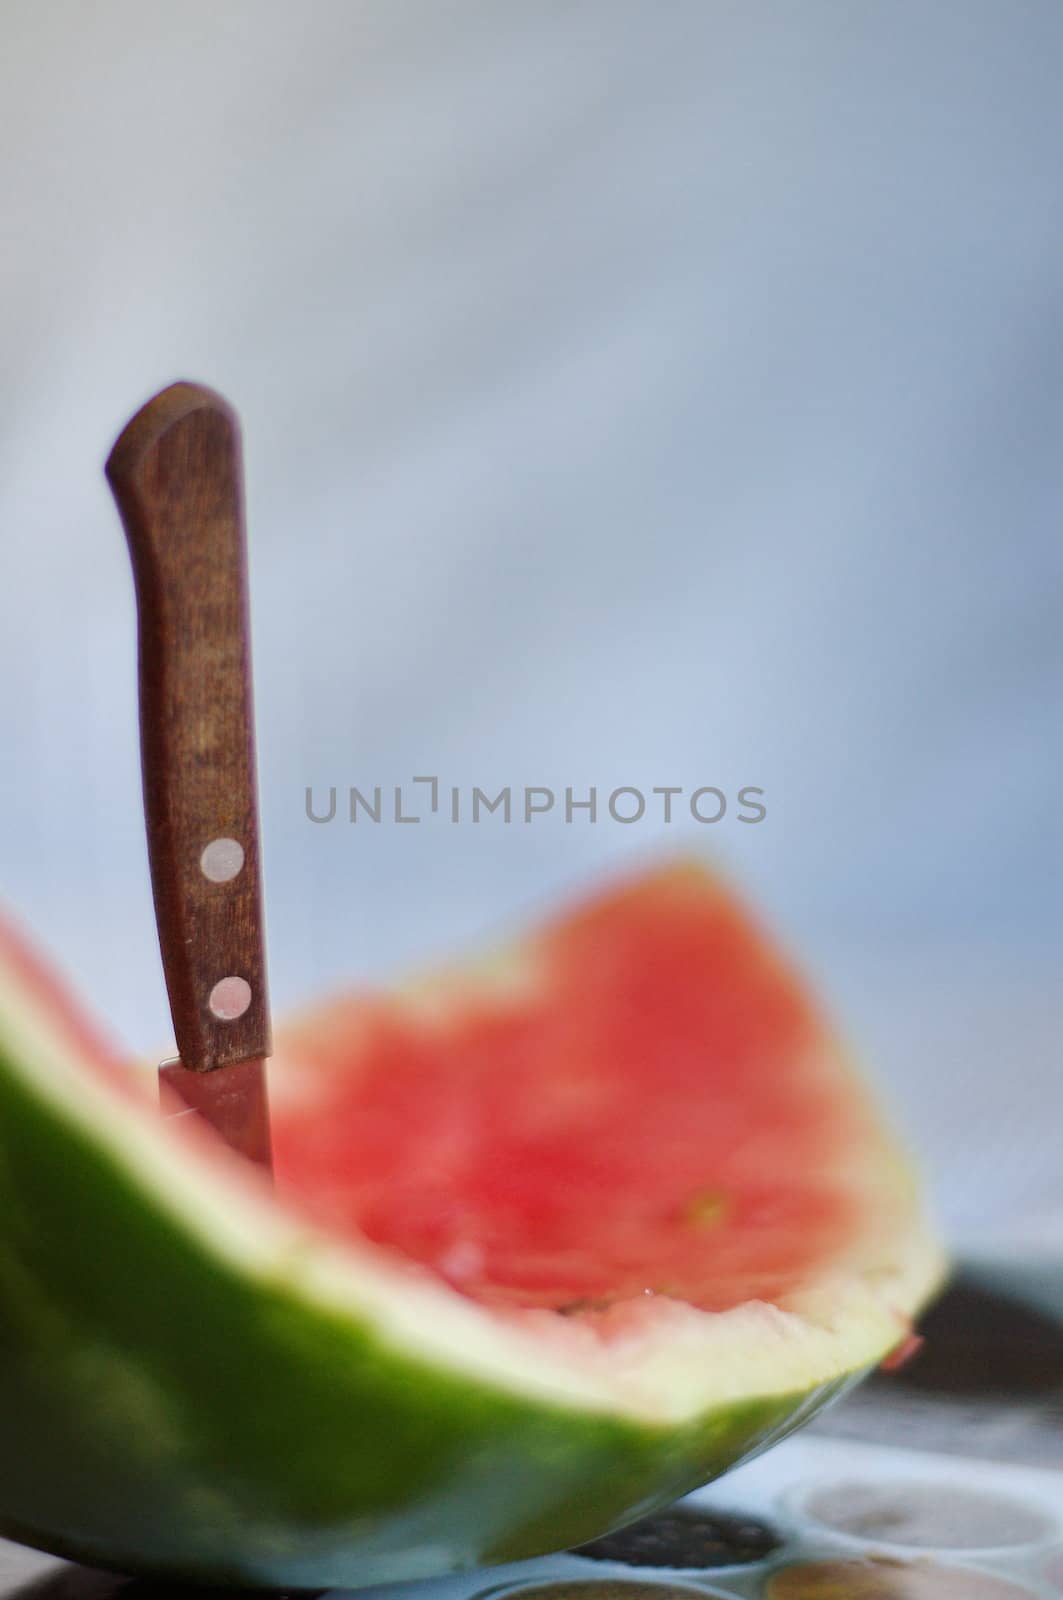 A slice of watermelon eaten by anderm